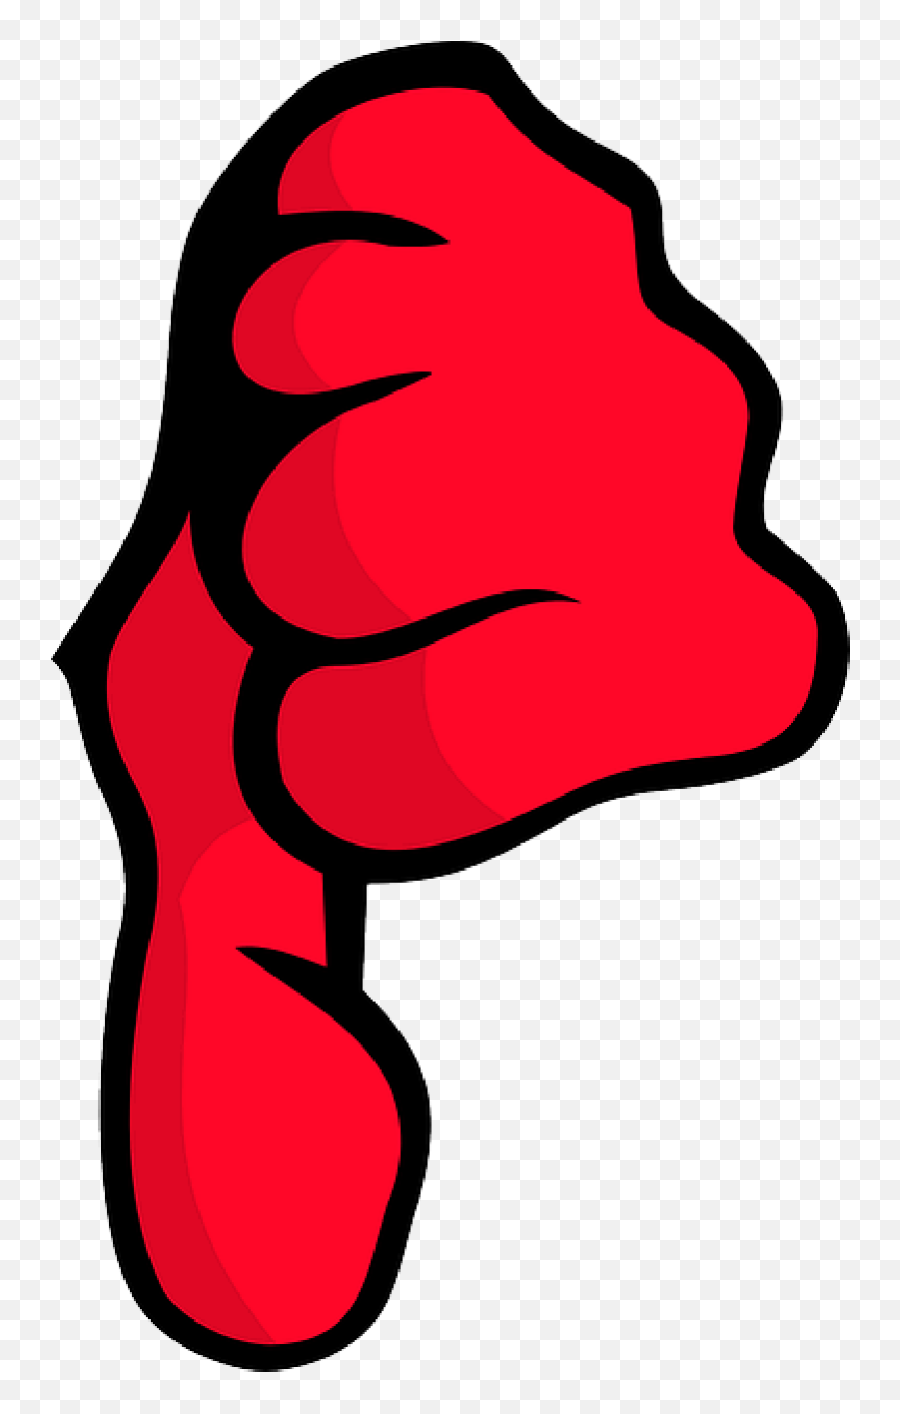 Download Big Red Thumbs Down - Full Size Png Image Pngkit Right And Wrong Clipart Emoji,Big Thumbs Up Emoji